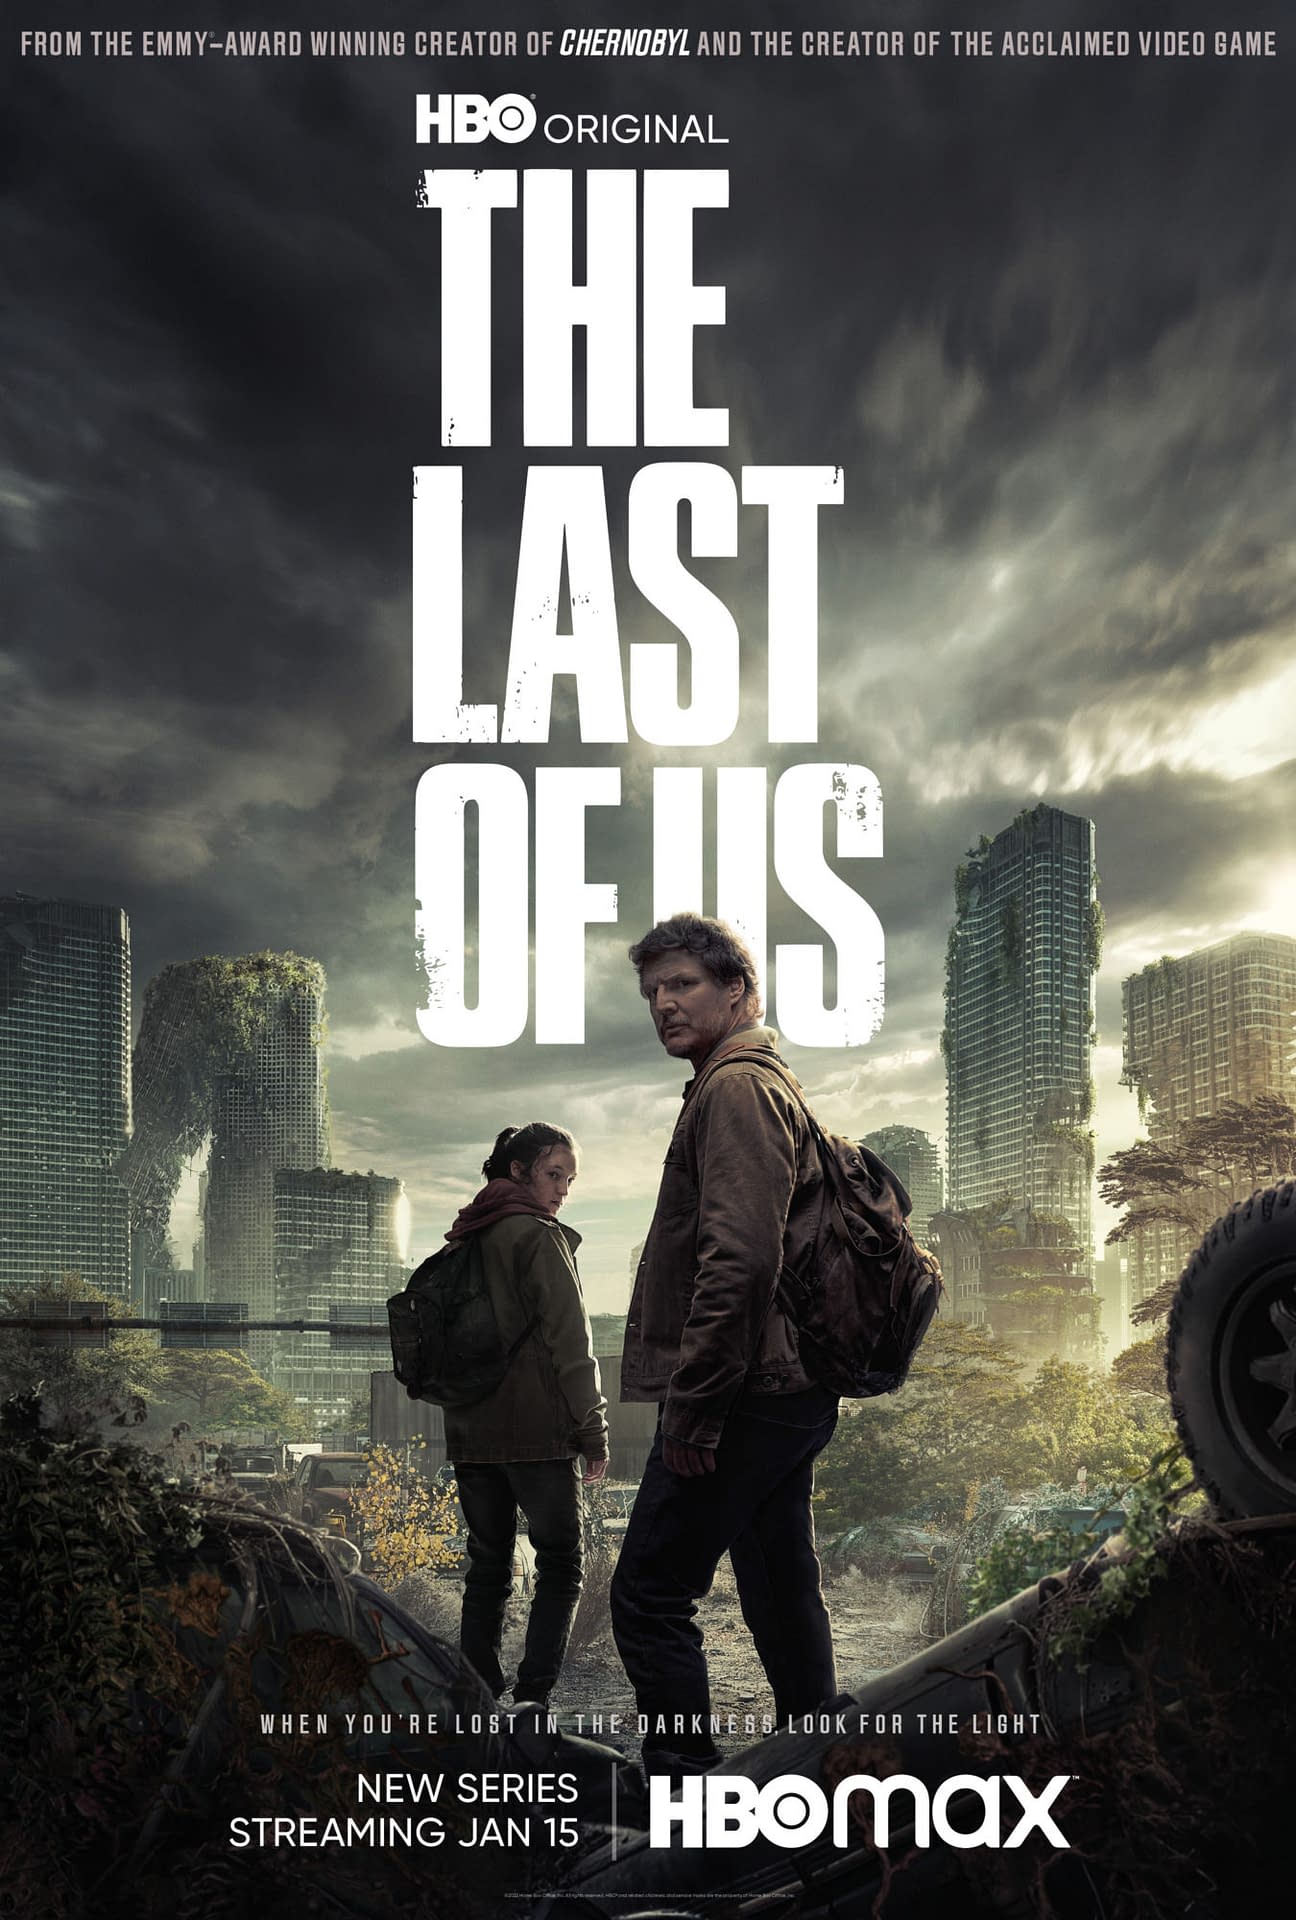 The Last of Us News on X: Game of Thrones actress @BellaRamsey will play  Ellie in HBO's The Last of Us    / X